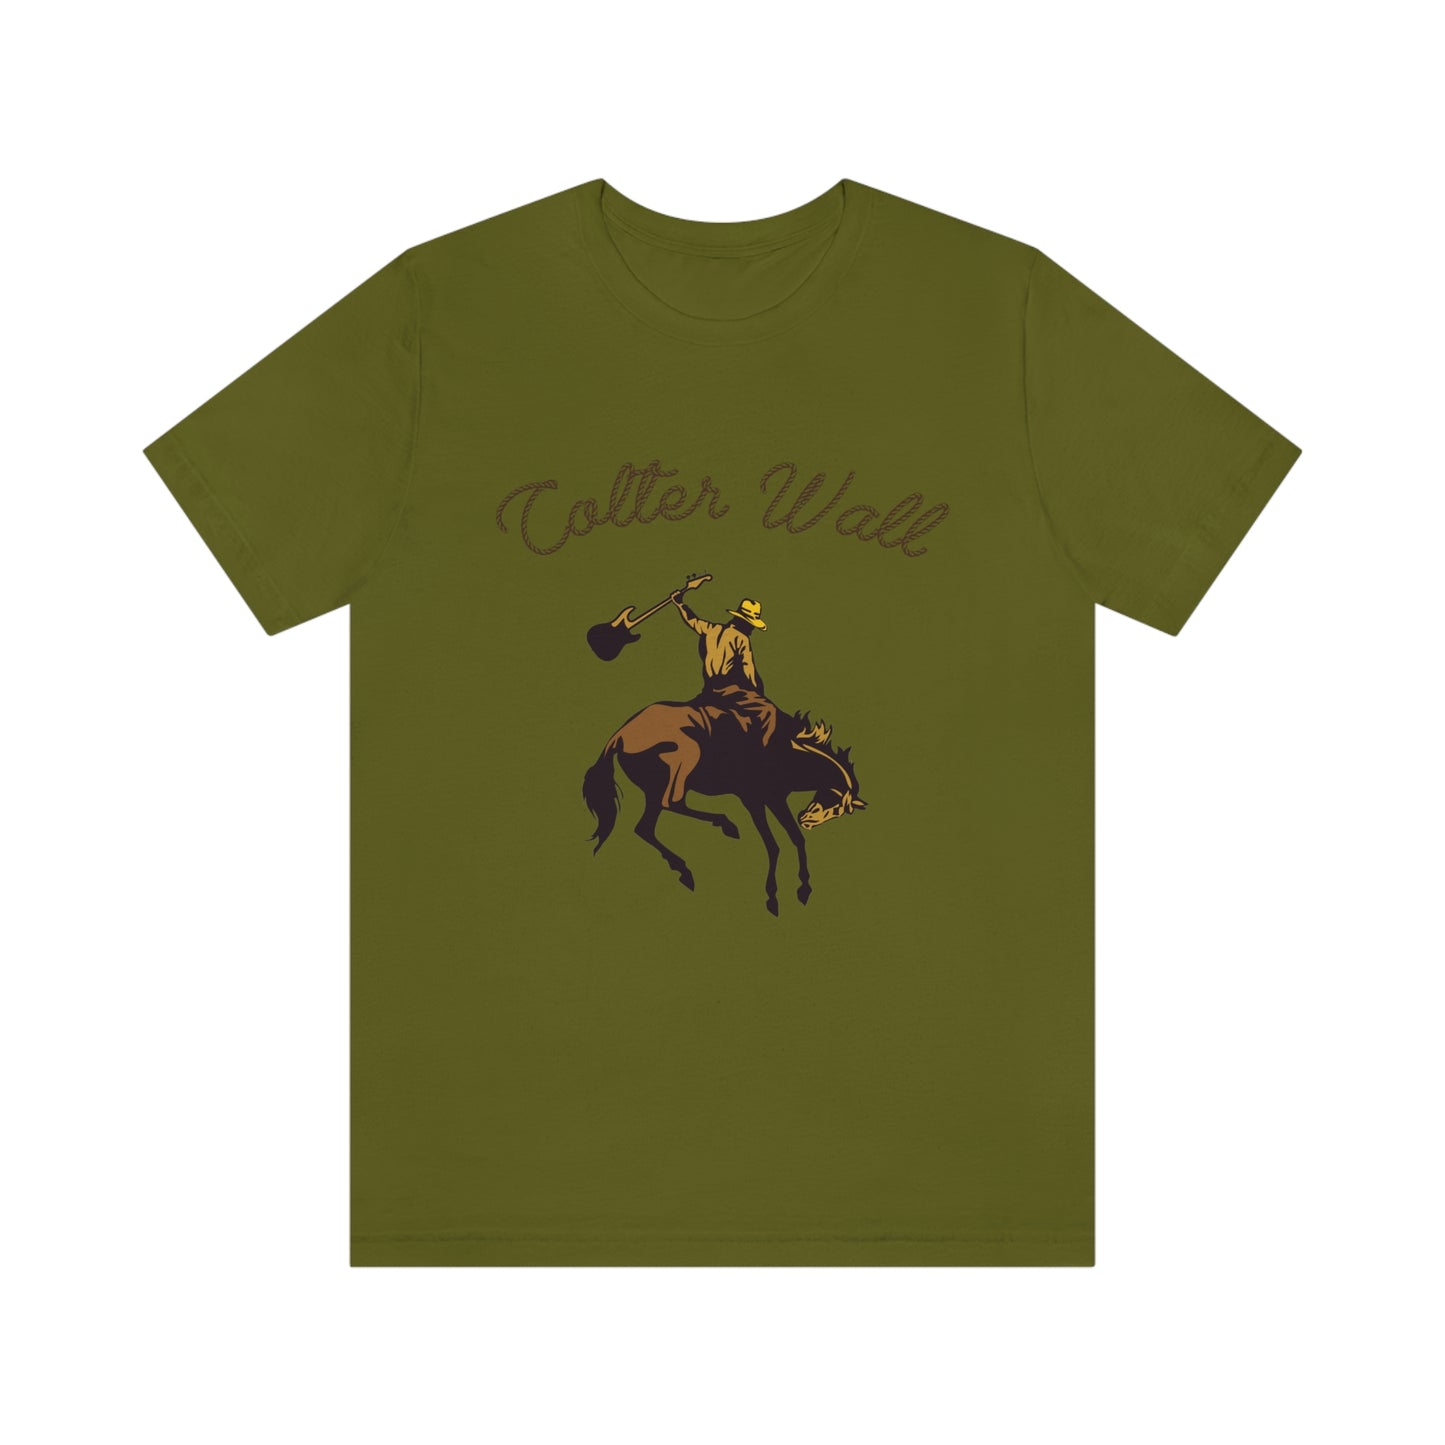 Colter Wall, Colter Wall Tshirt, Rodeo Shirt, Colter Wall Merch, Colter Wall Gift Idea, Western Tee, Country Music Tee, Western Rodeo